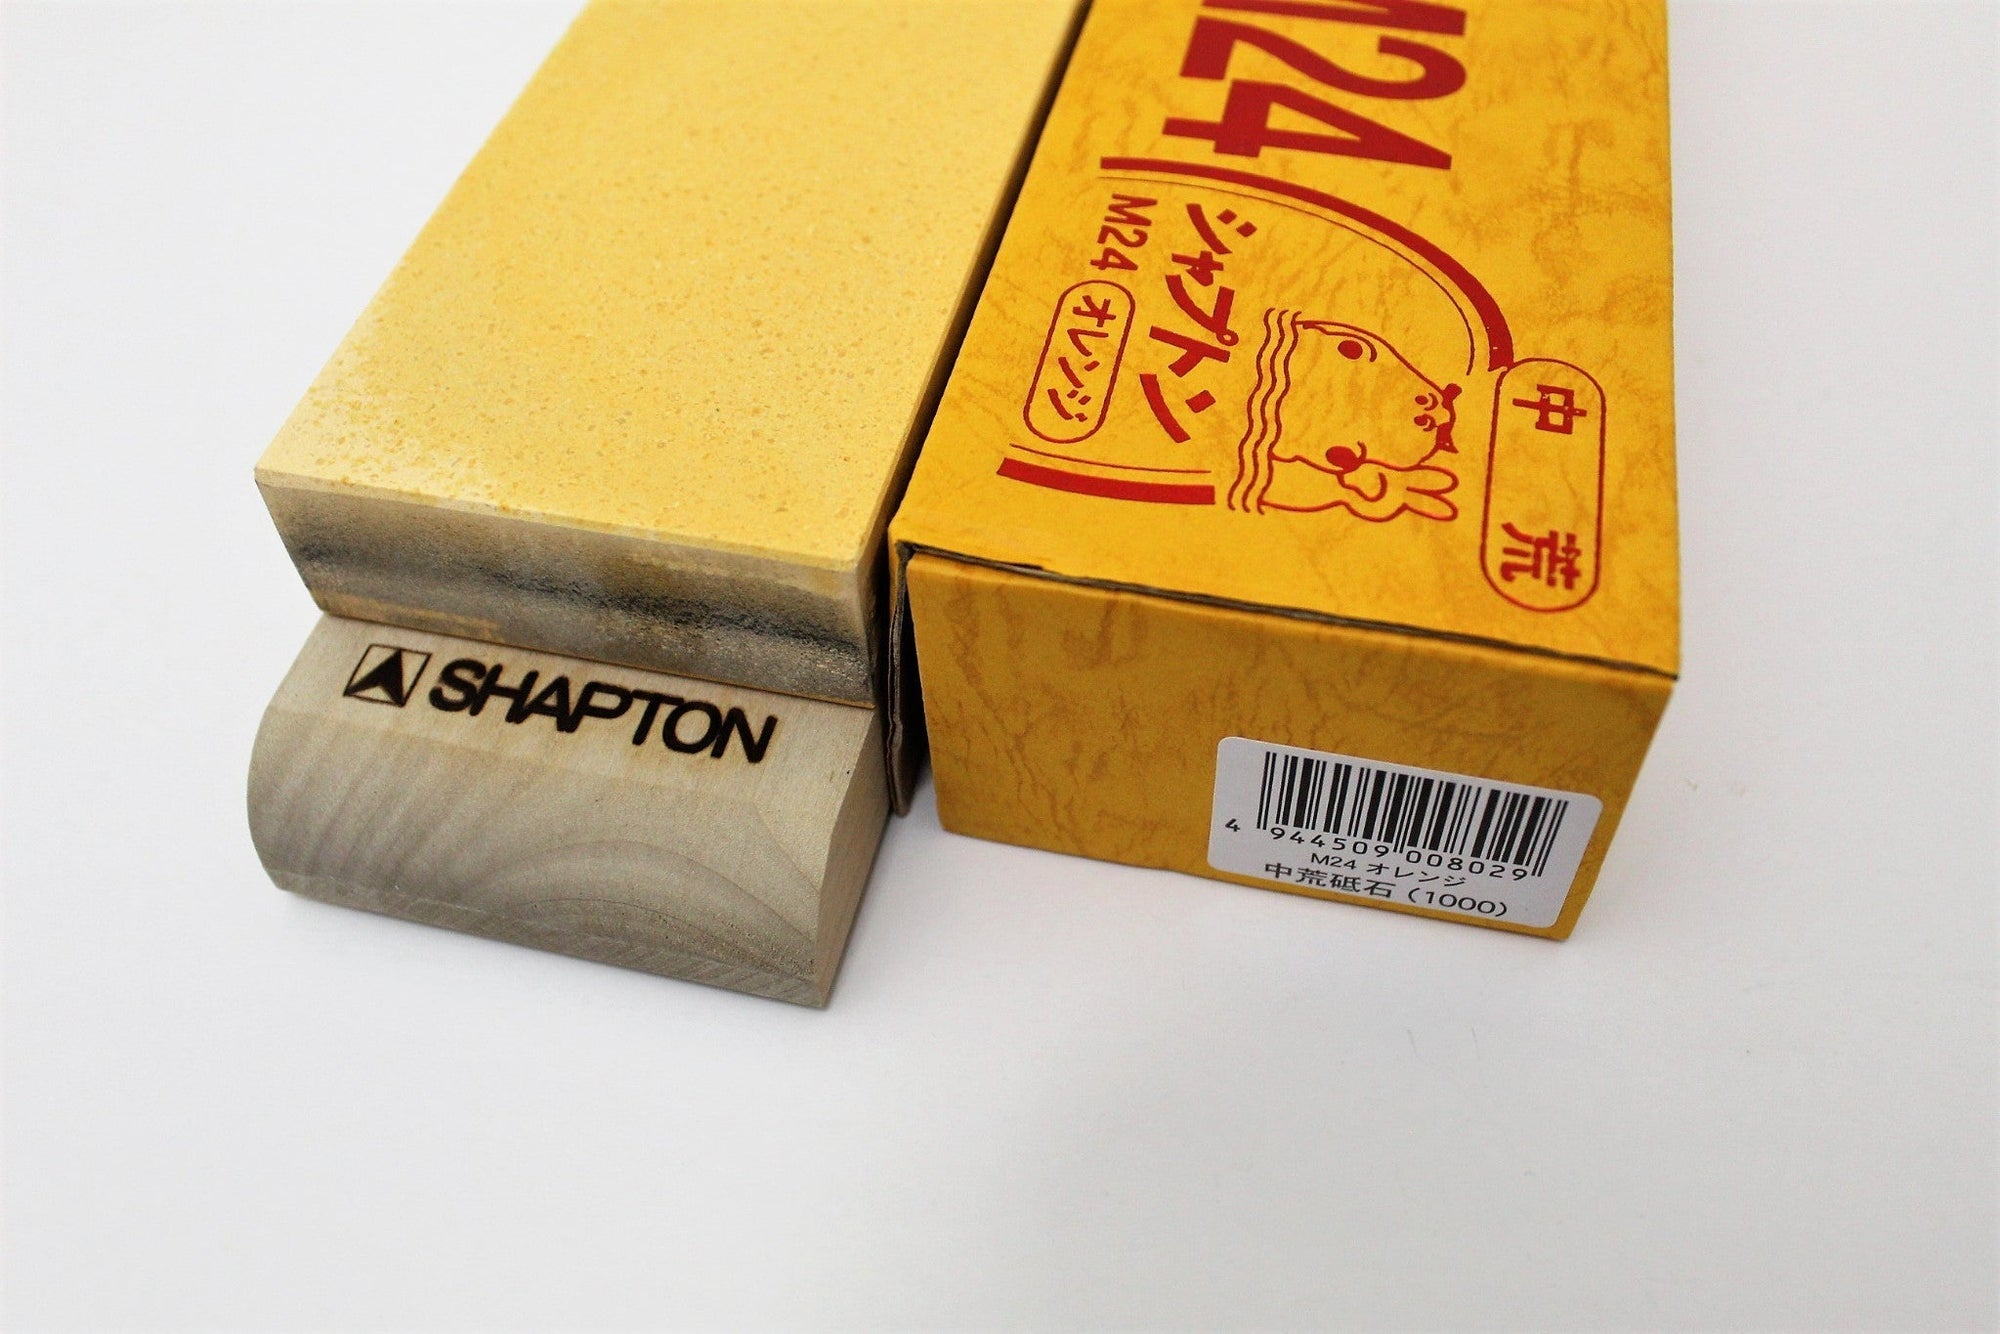 https://cdn.shopify.com/s/files/1/0077/4399/5970/files/accessories-shapton-japanese-sharpening-stone-with-base-grit-1000-2_2000x.jpg?v=1698704607